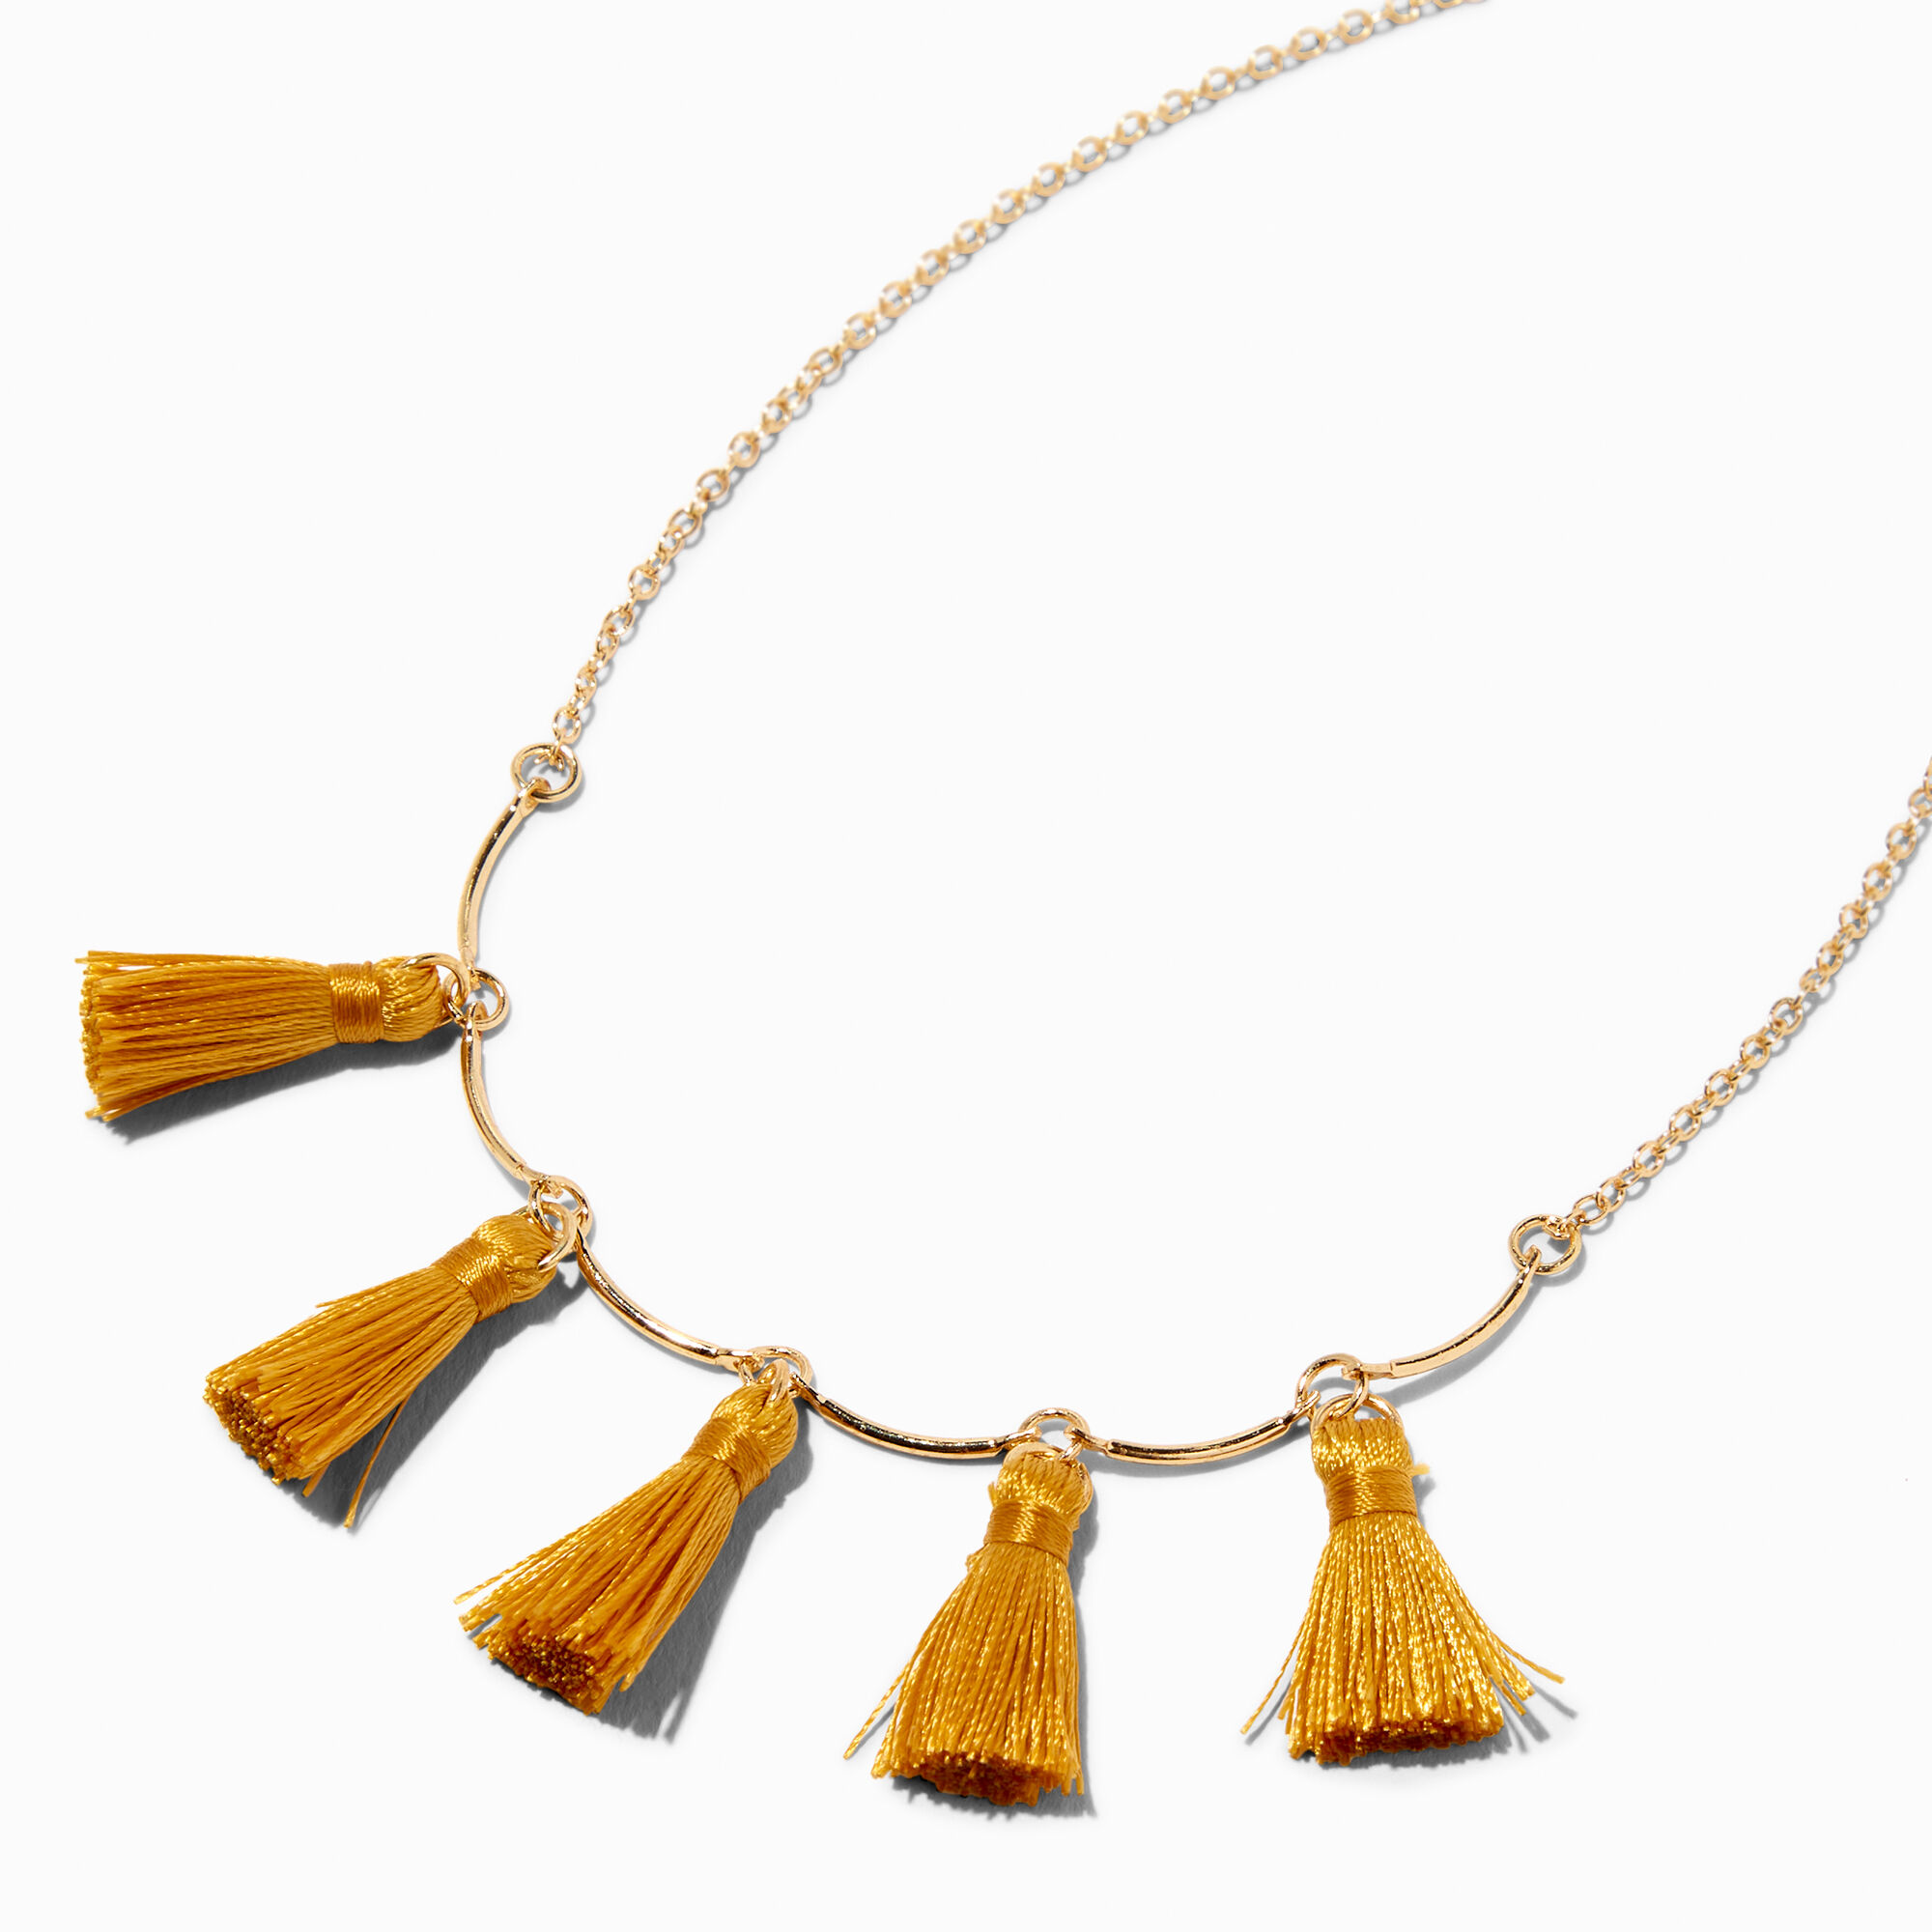 View Claires Tone Mustard Tassels Charm Necklace Gold information